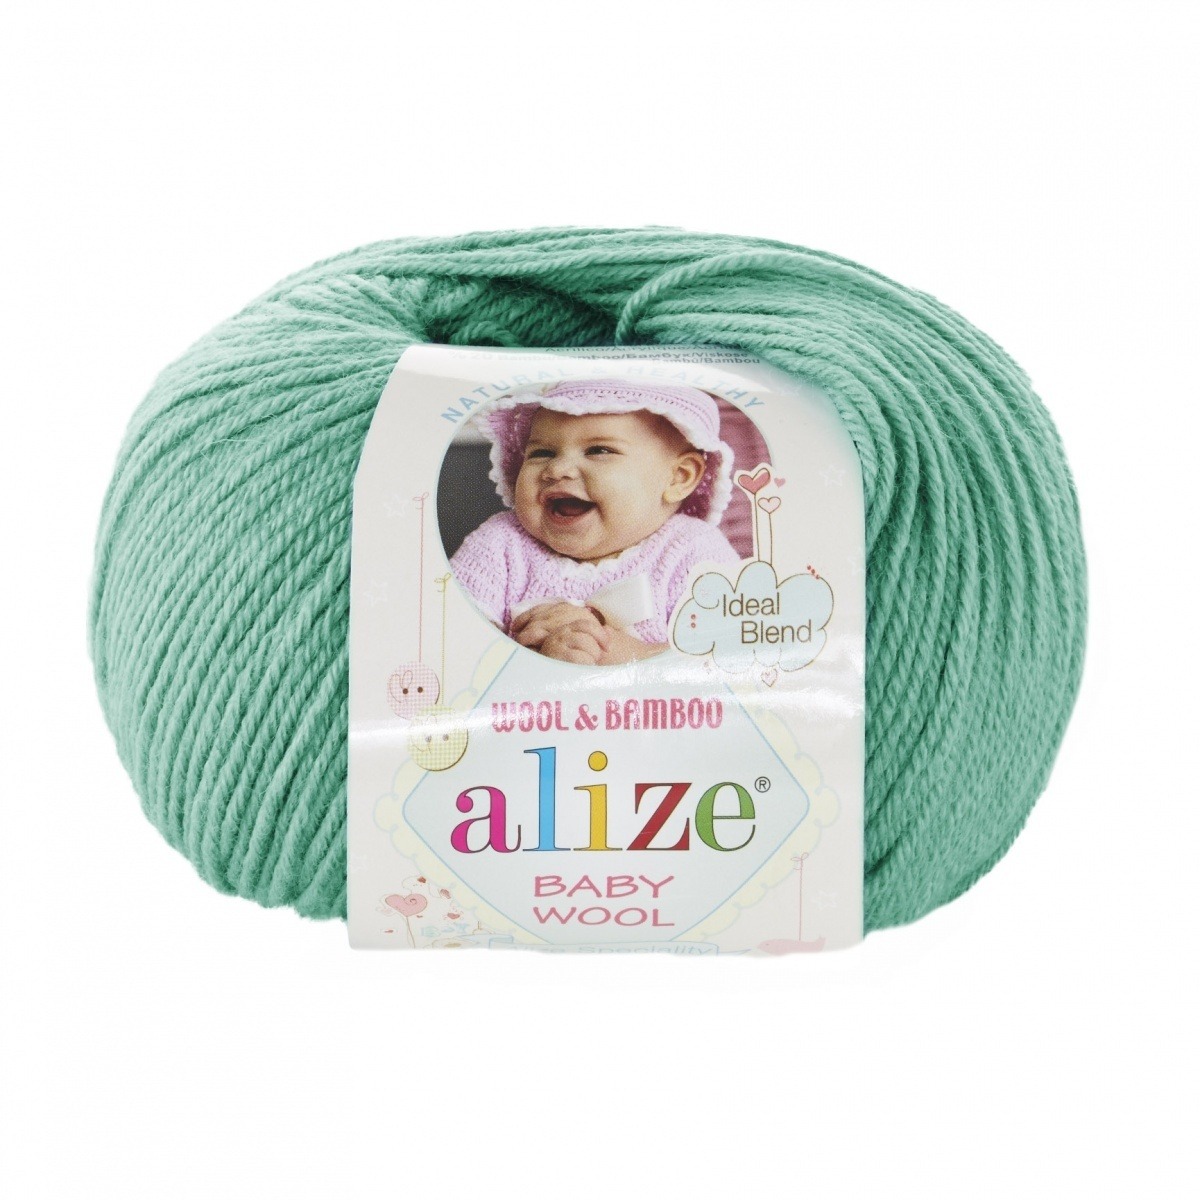 Alize "Baby wool" (612)